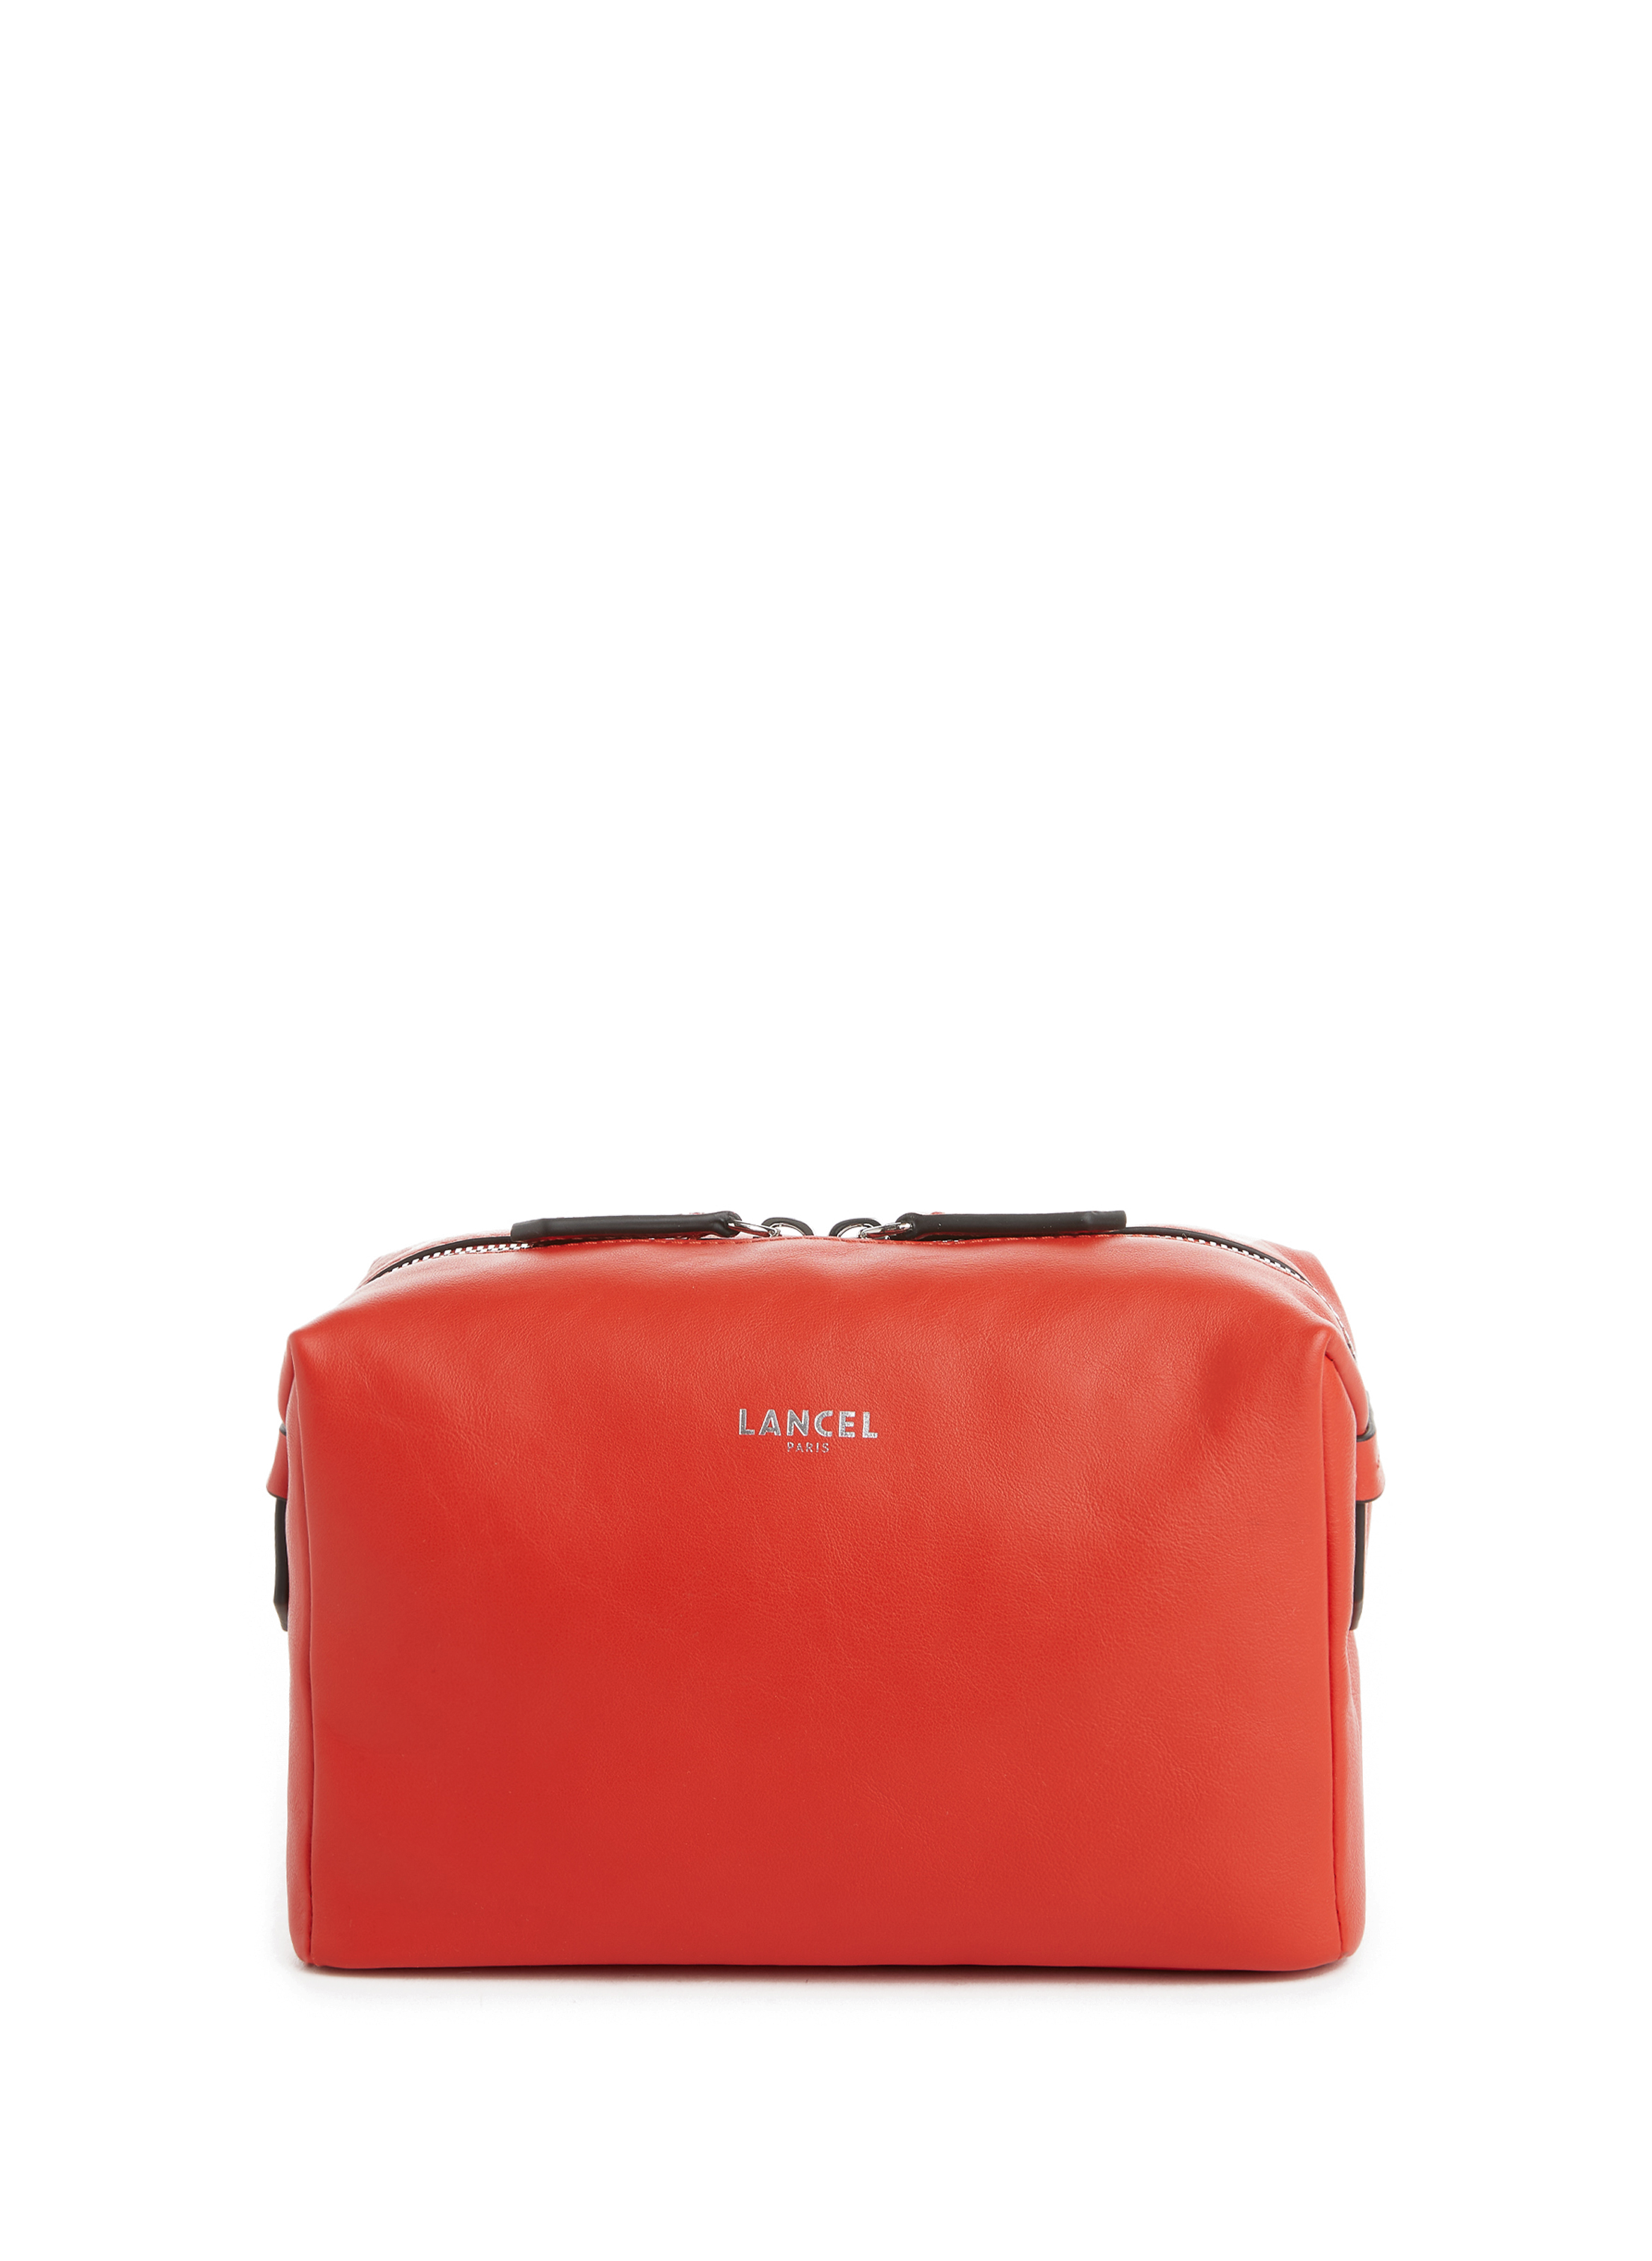 Mens Bags Luggage and suitcases Lancel Neo Pop Leather Travel Bag in Red for Men 